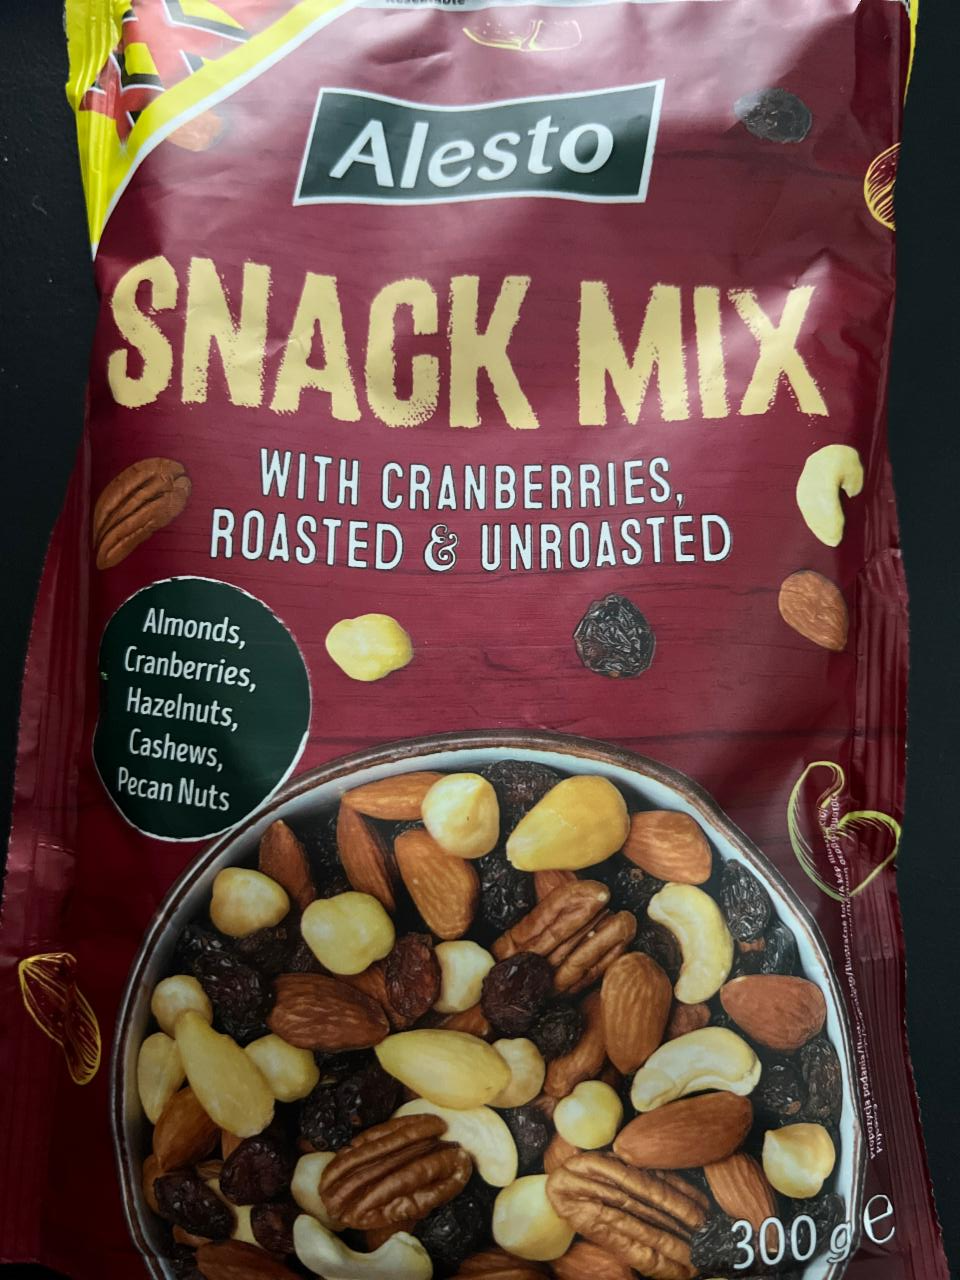 Fotografie - Snack mix with cranberries roasted & unroasted Alesto